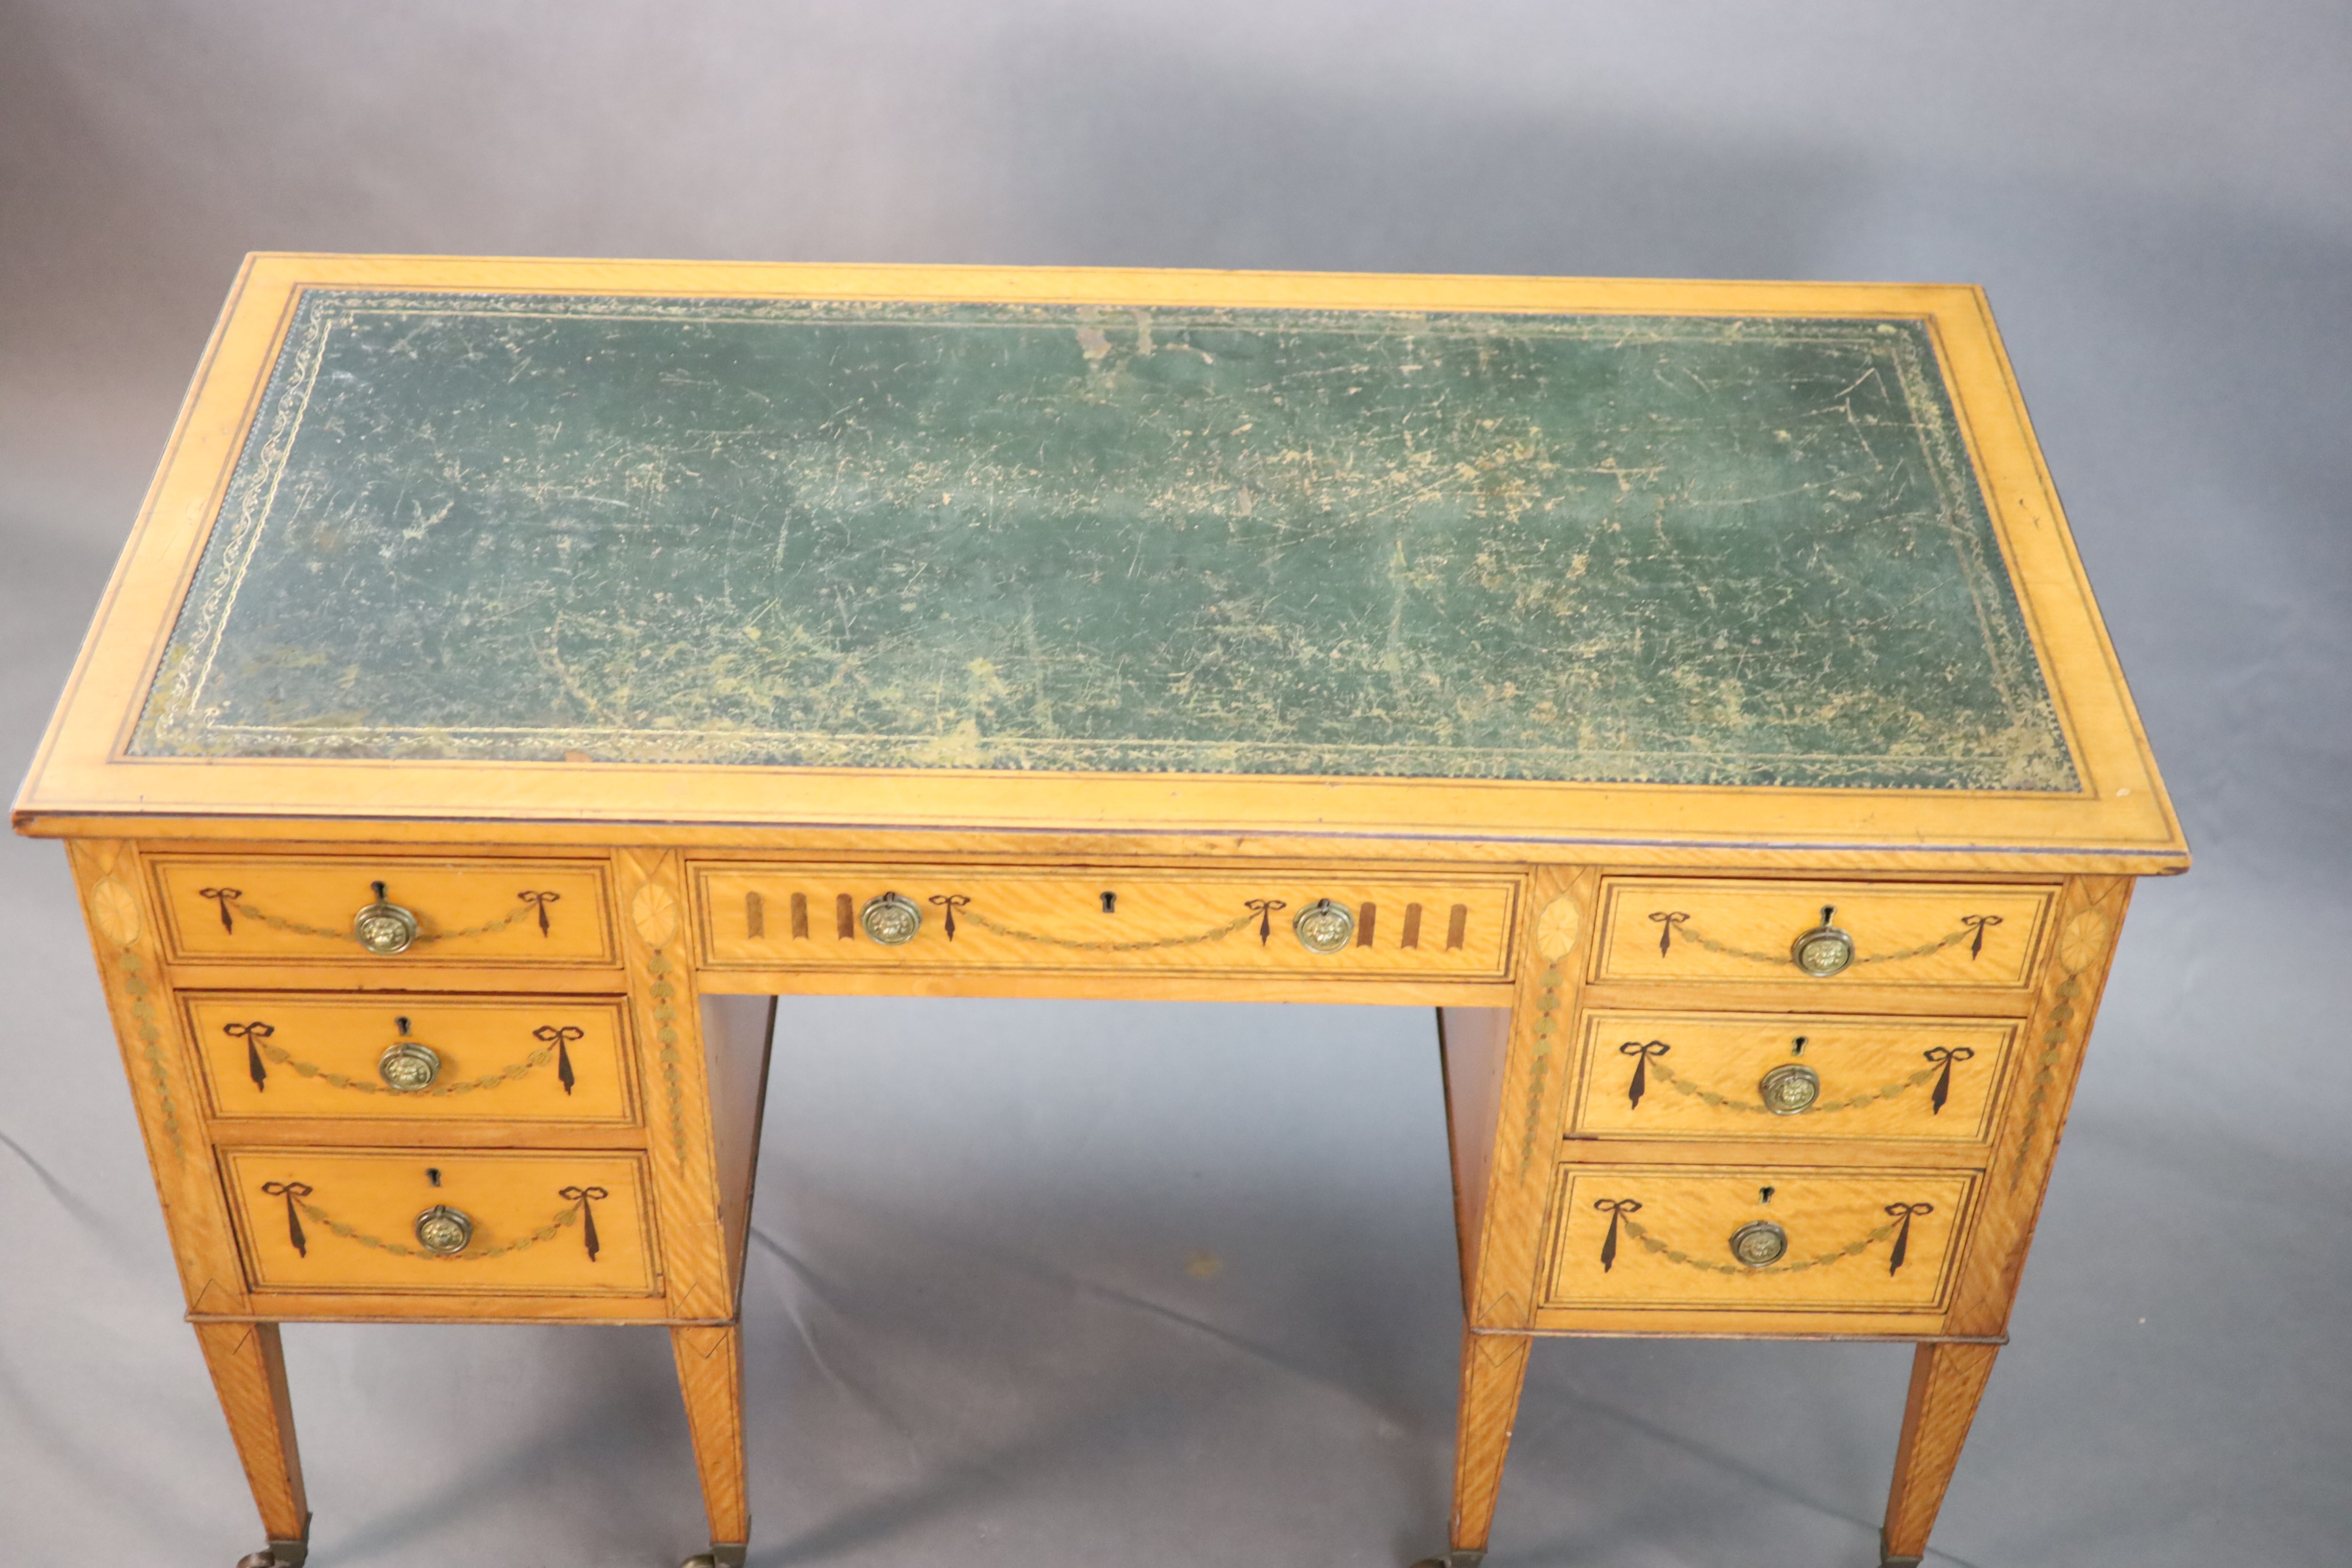 An Edwardian Edwards & Roberts marquetry inlaid satinwood kneehole desk, W.4ft D.2ft H.2ft 6in.